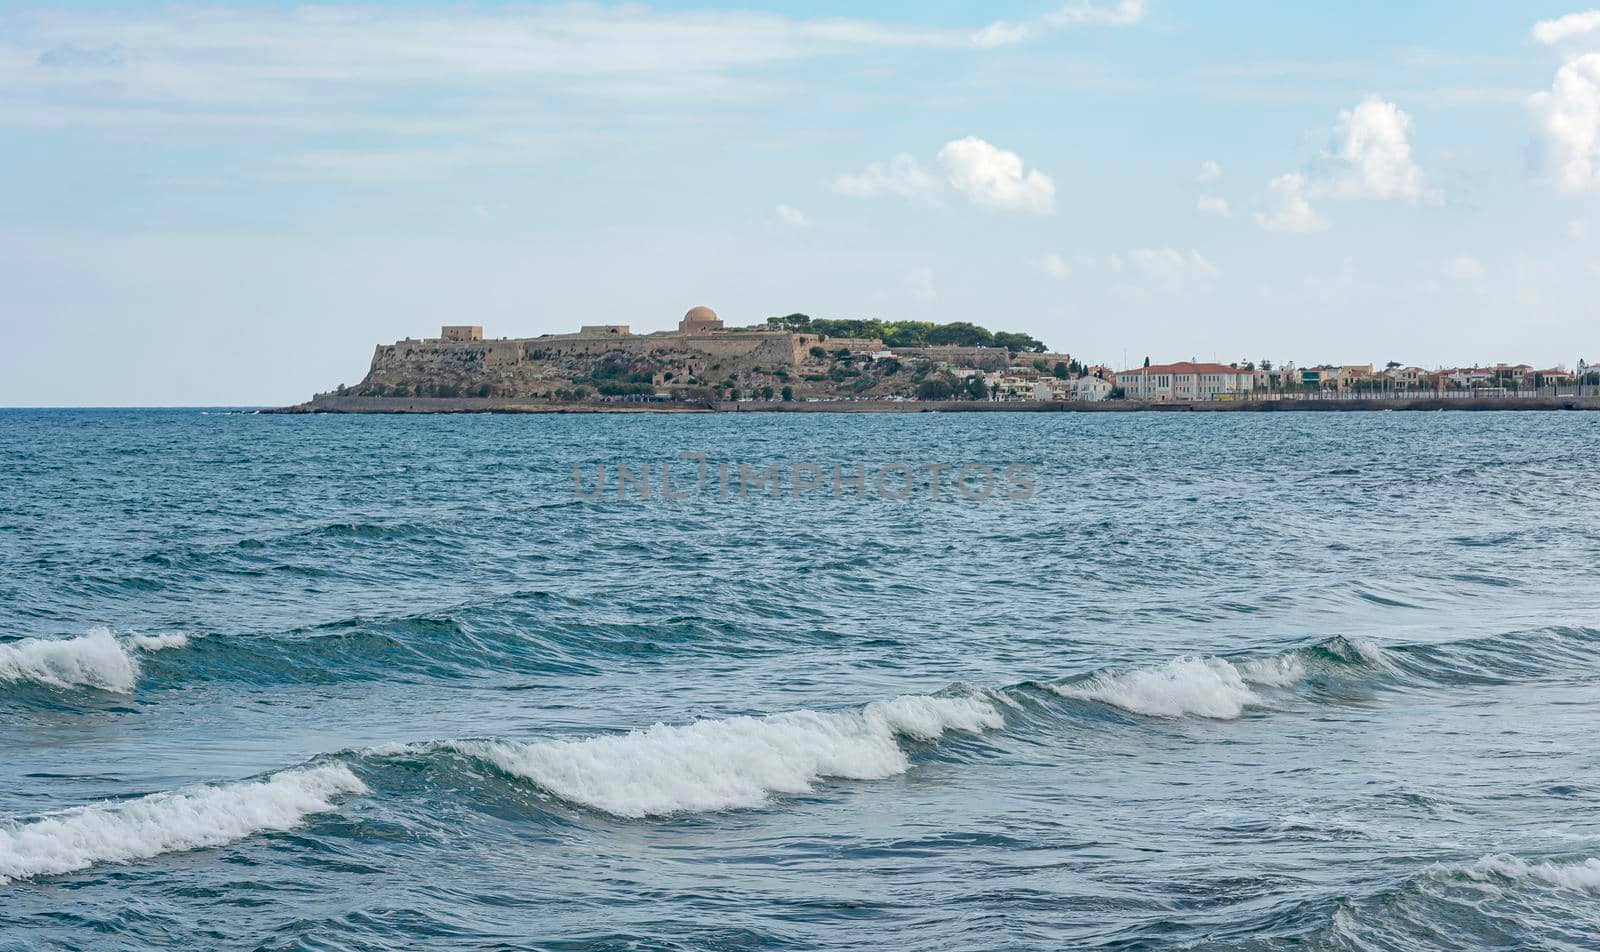 Seascape. Fortress and old town on the coast (Greece, Crete, Rethymno). Stock photo.